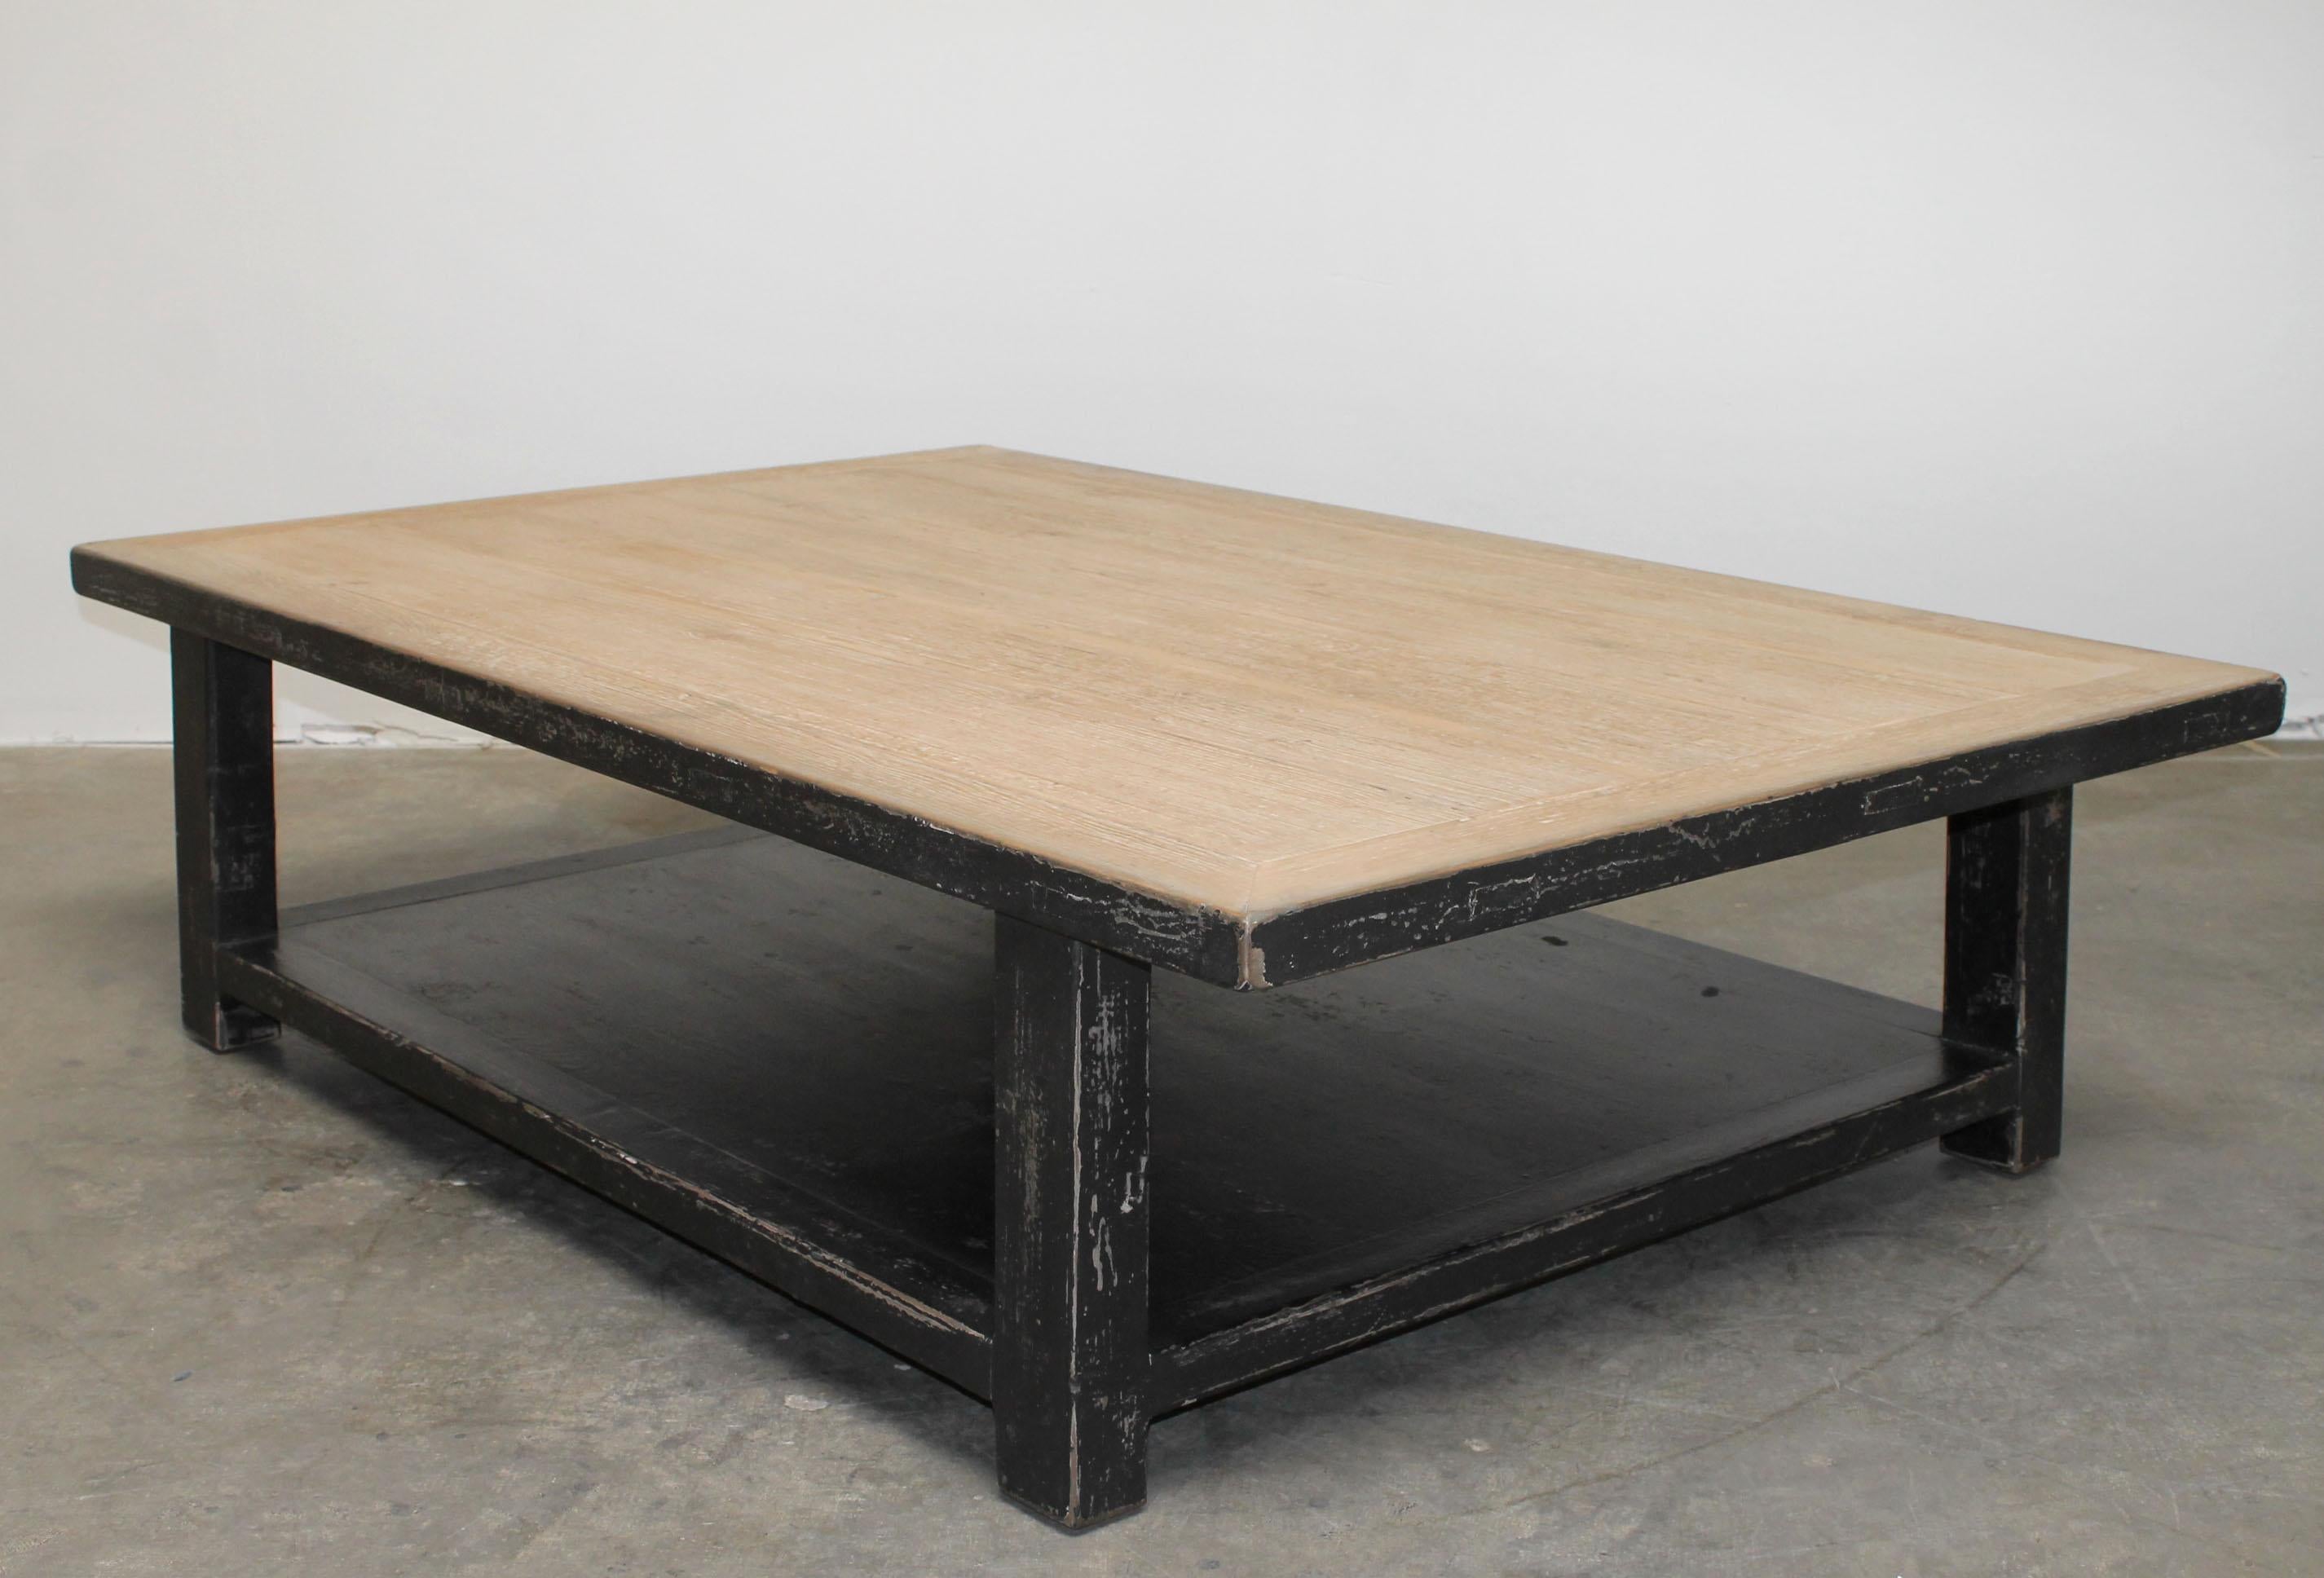 Large Reclaimed Pine Wood Coffee Table with Distressed Black Finish 1